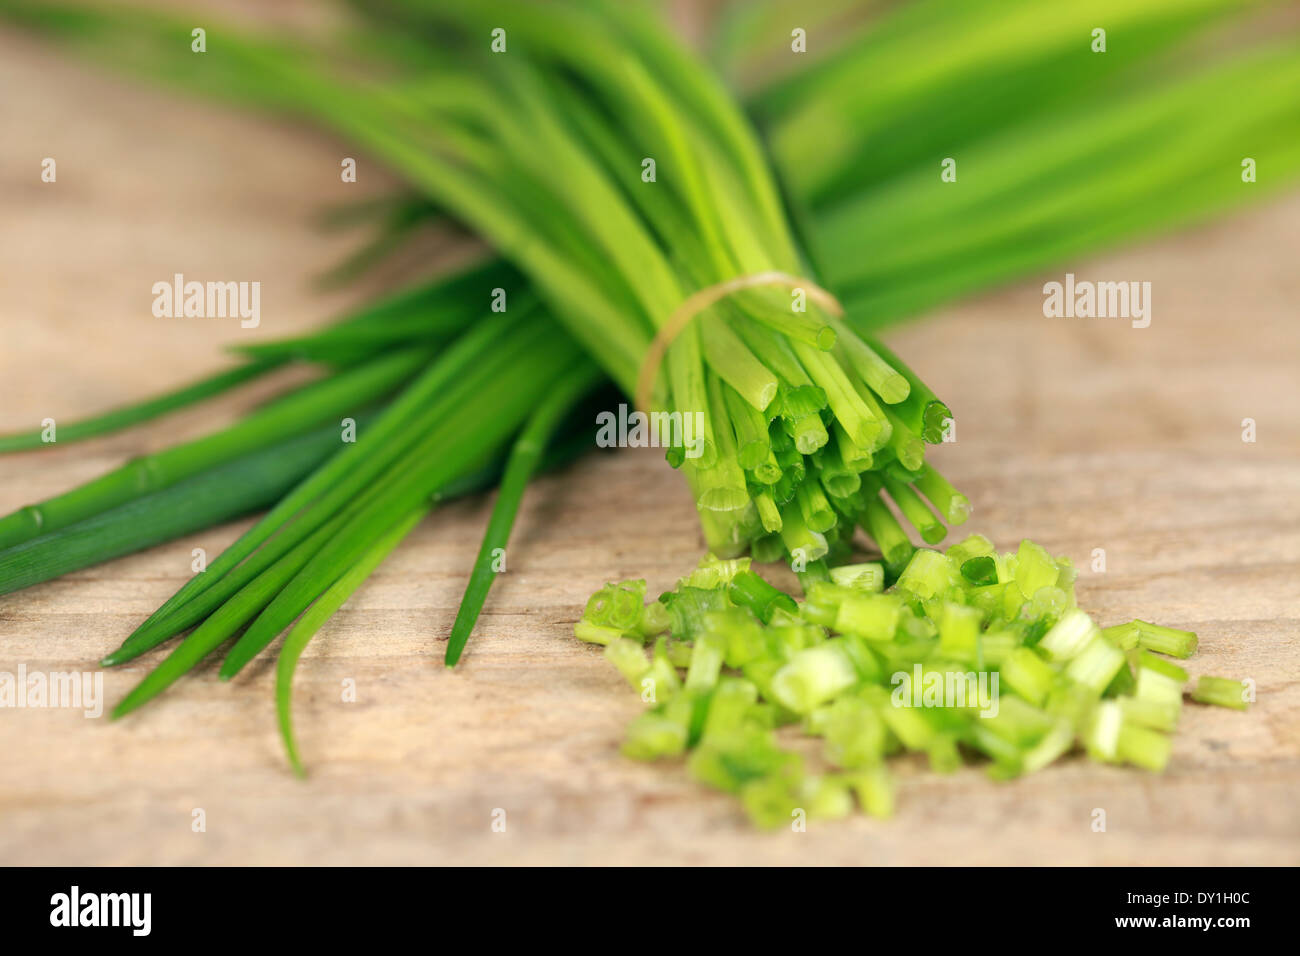 Chopped chives on wooden board, shallow depth of field Stock Photo